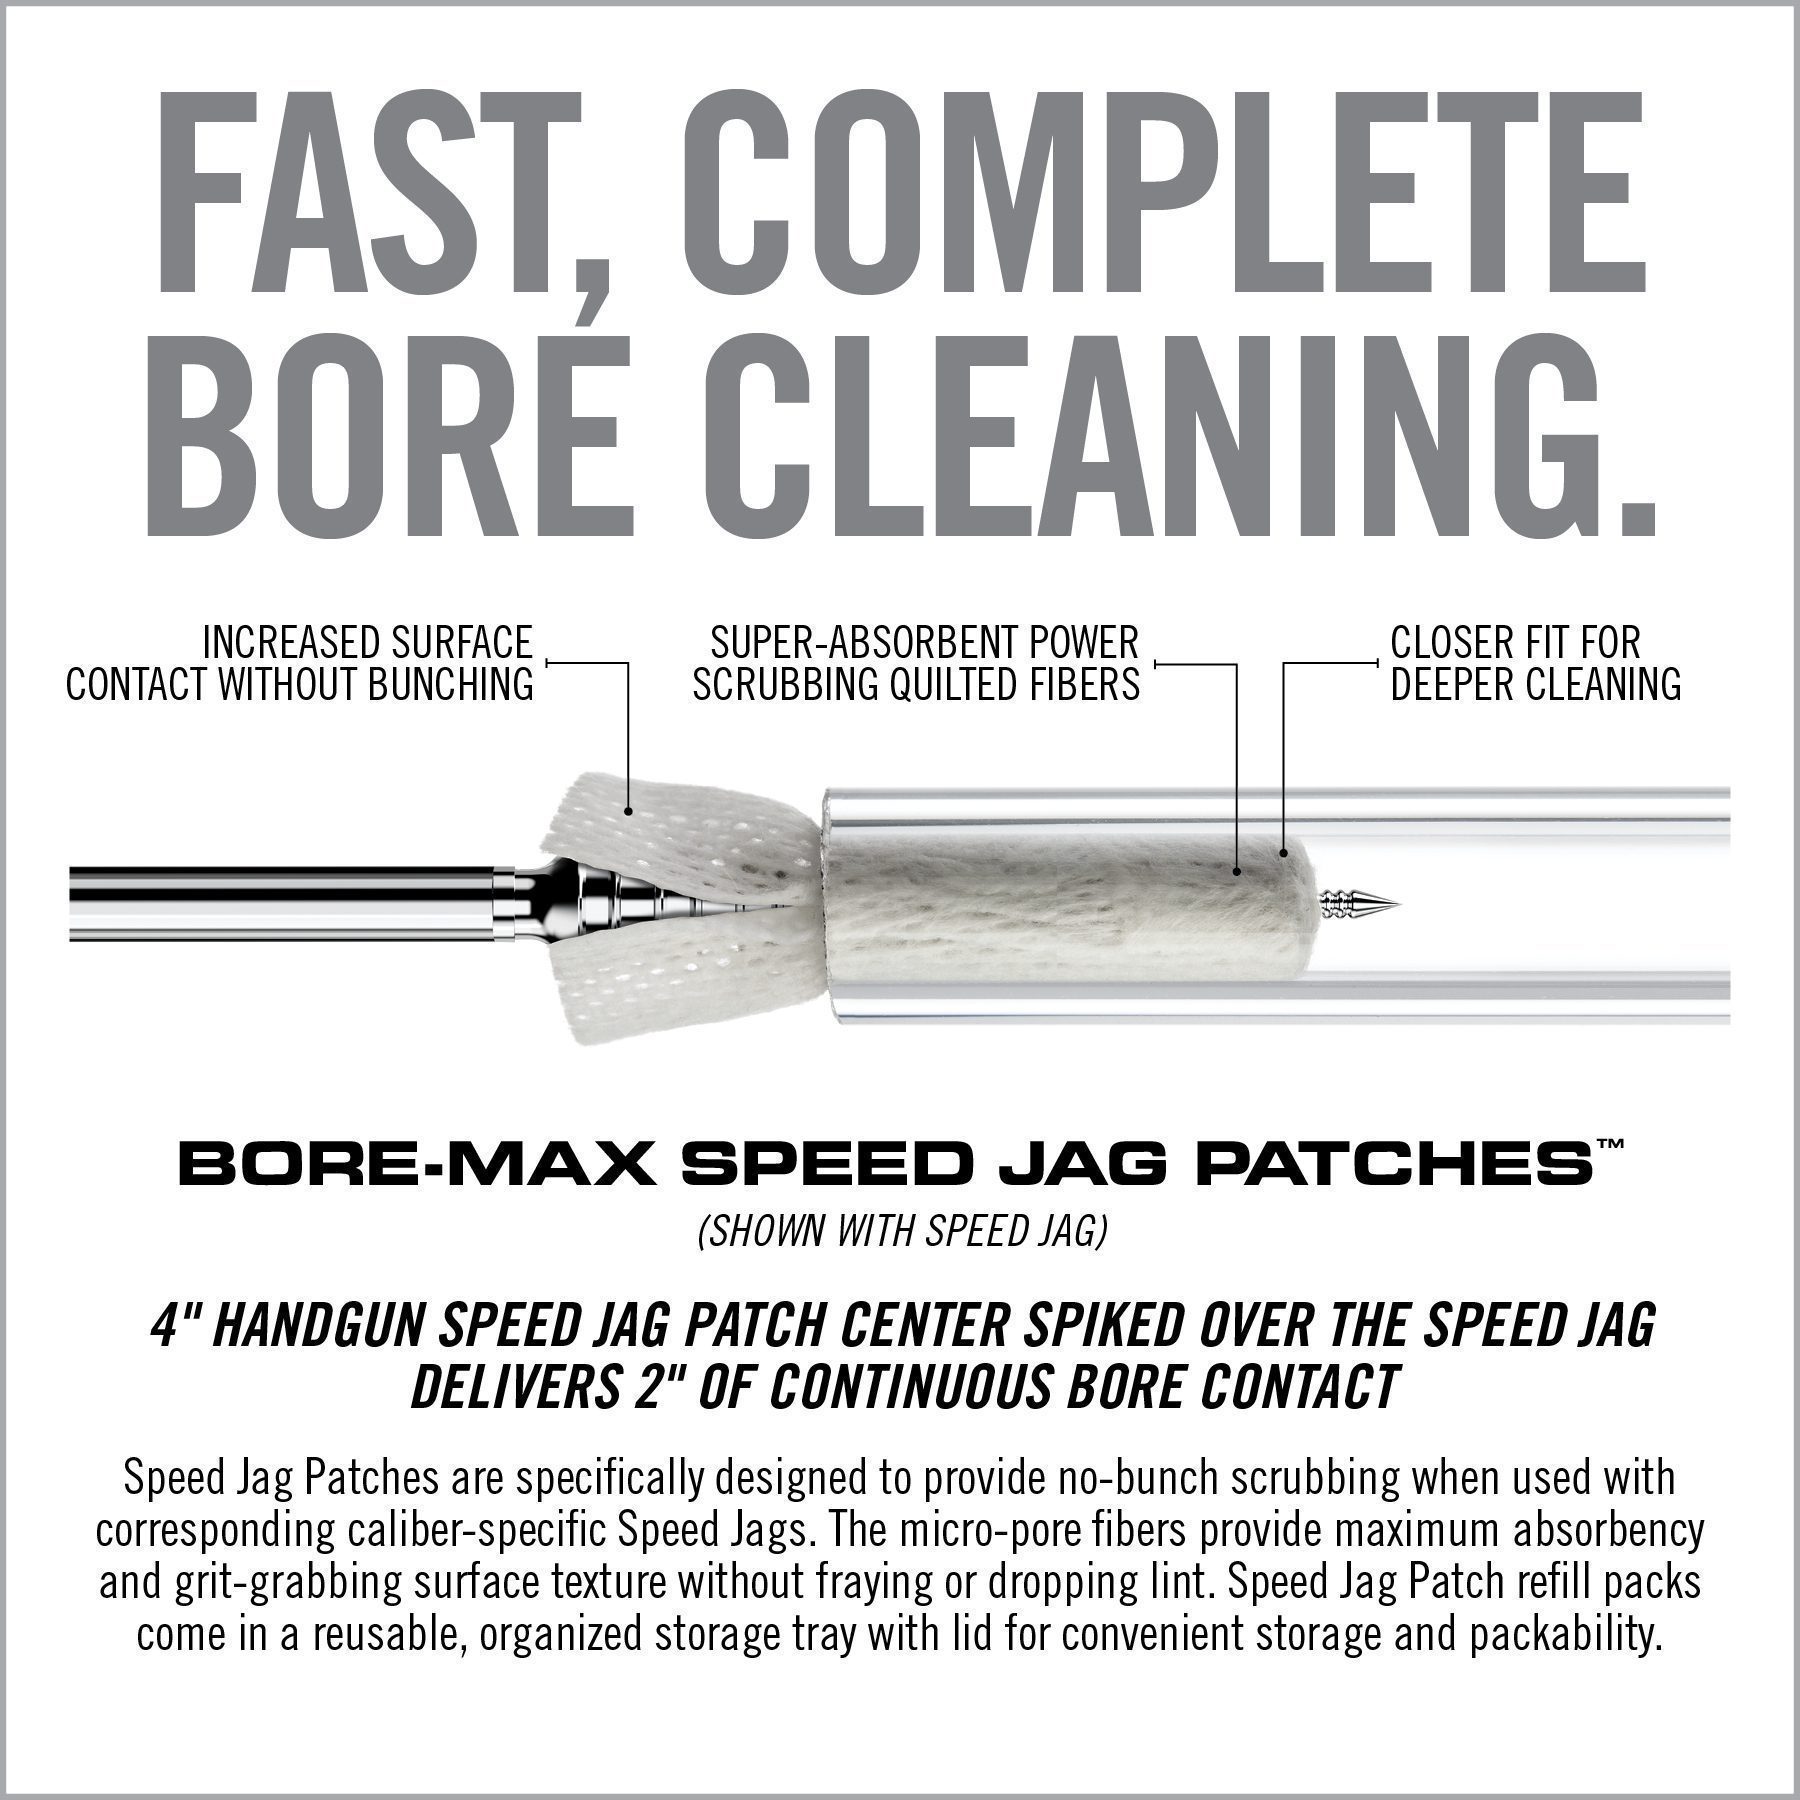 the instructions for how to use bore max speed jag patches